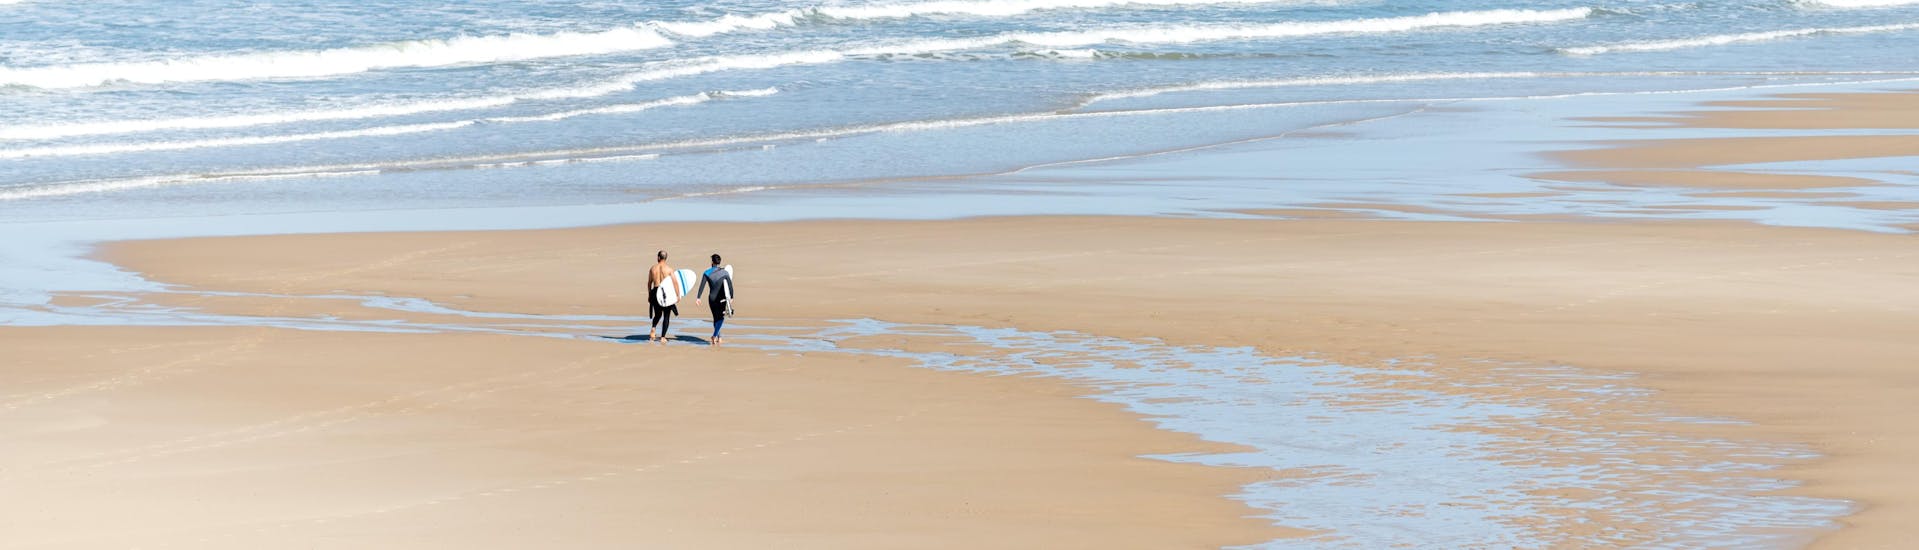 Two men are walking on the beach of Biscarosse with their surfboard under their arm, where many surfing lessons take place.